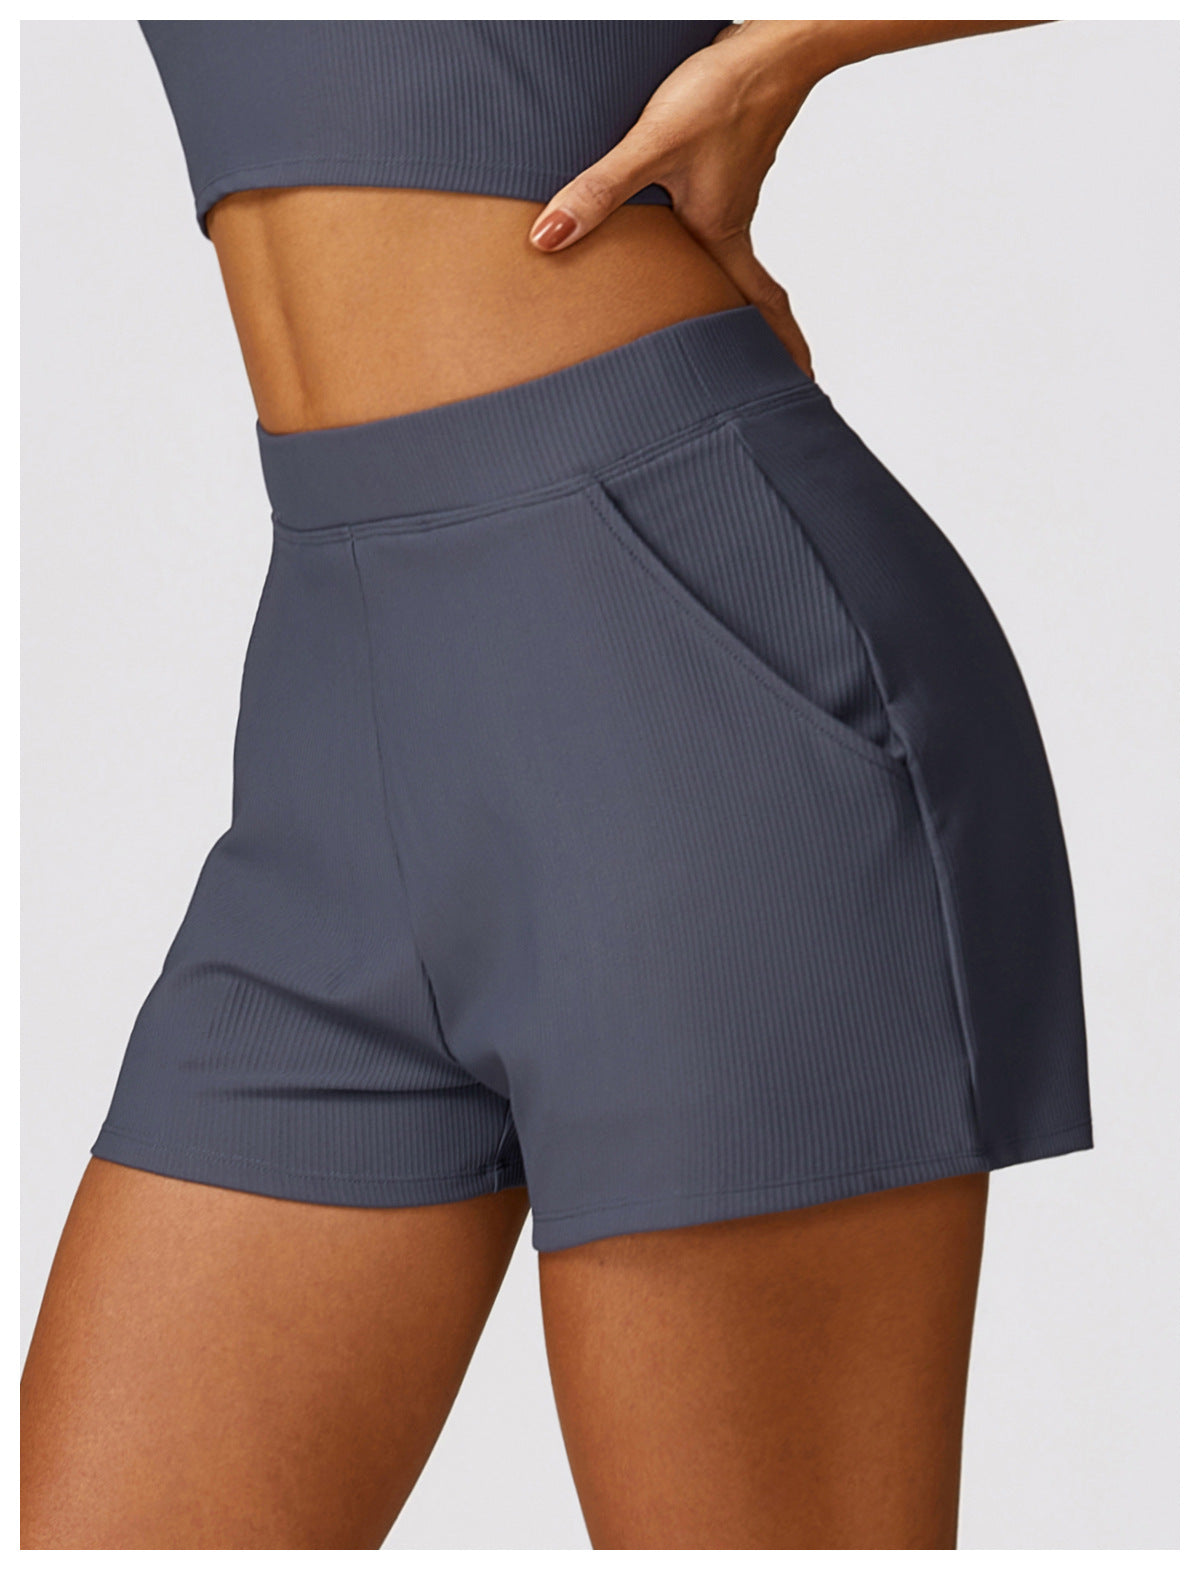 Loose Leisure Sports Shorts Quick-drying Yoga Running Workout Shorts